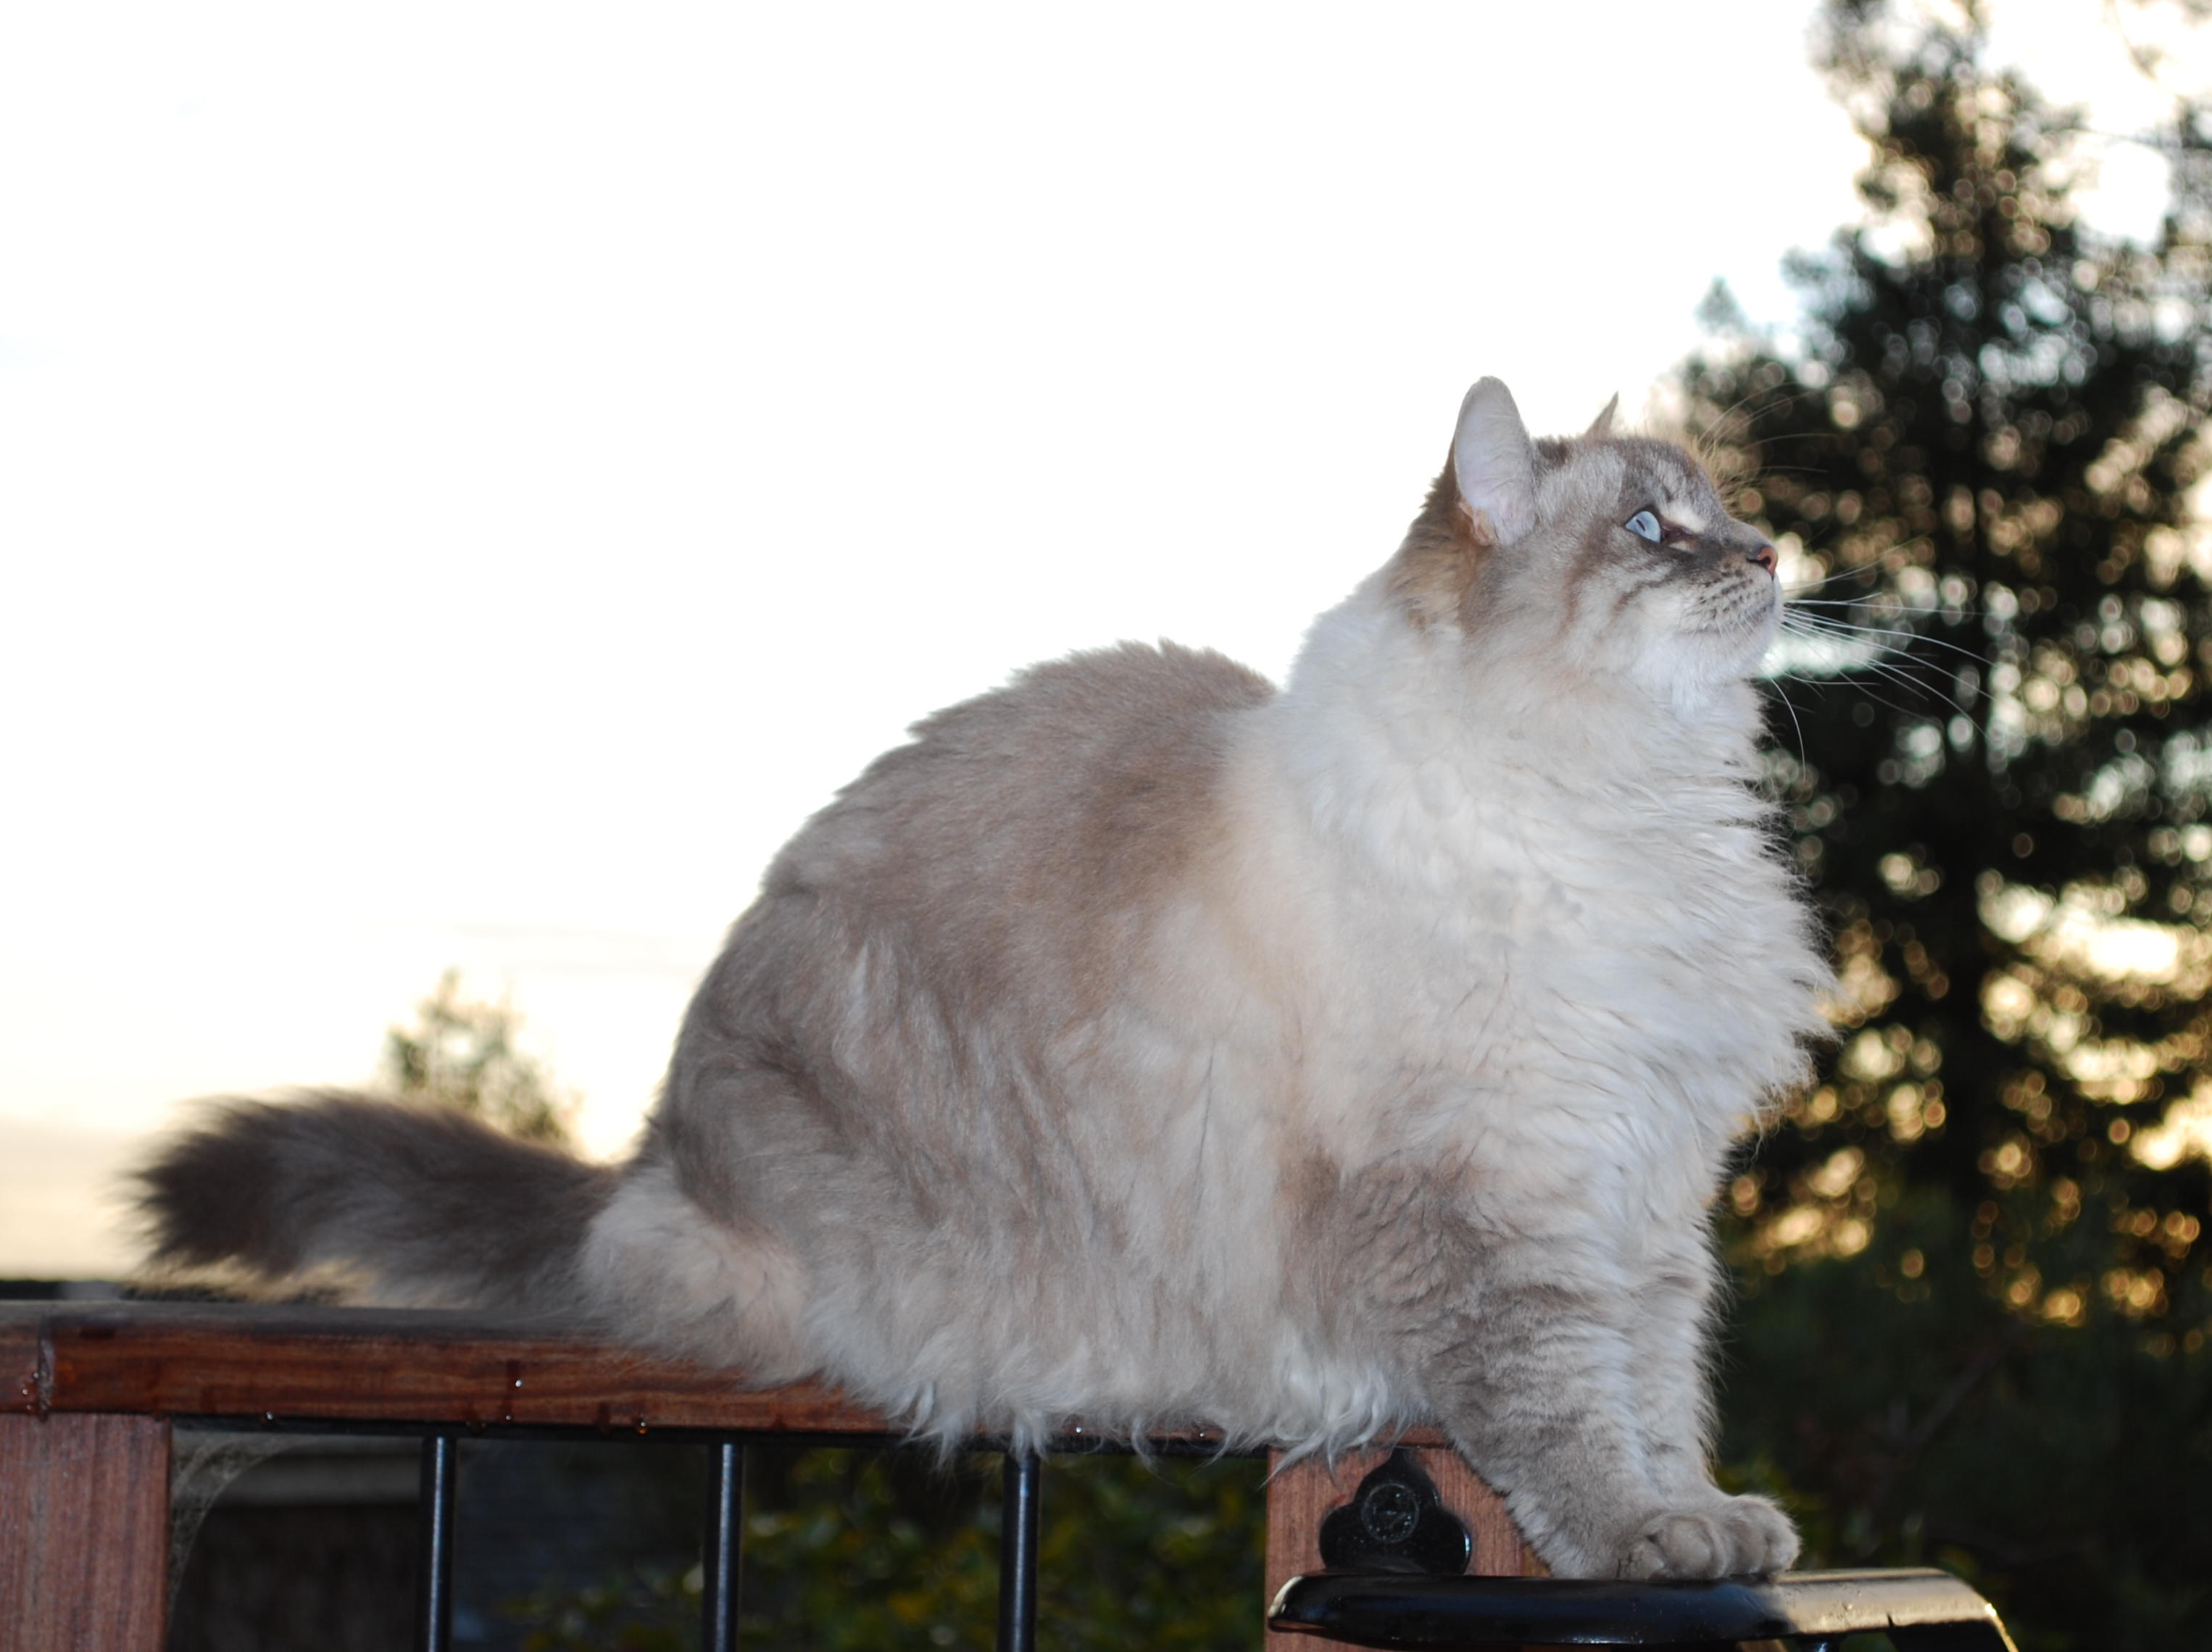 White and grey fluffy cat with light blue eyes sitting on a deck railing and looking up. 